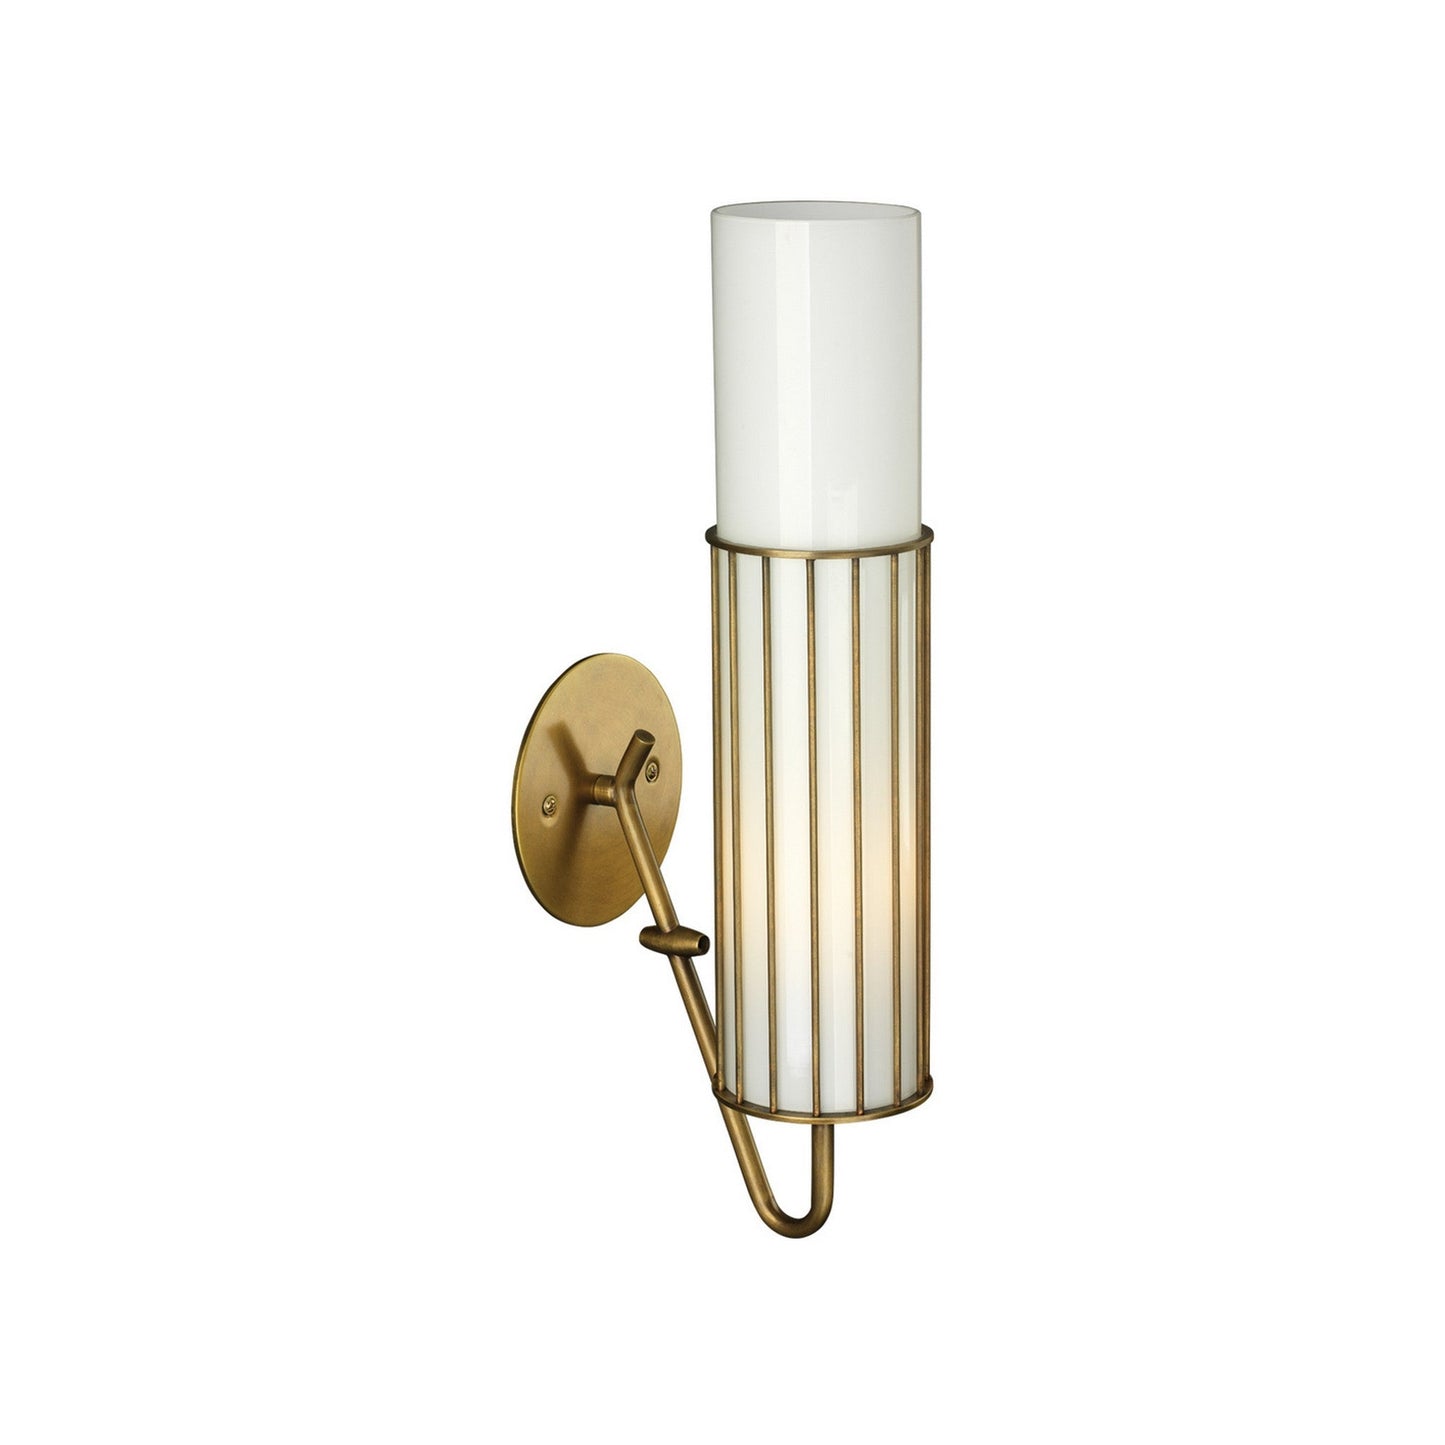 Jamie Young Torino 4" x 17" 1-Light Cylinder Antique Brass Wall Sconce With Metal Wire Frame and White Glass Shade